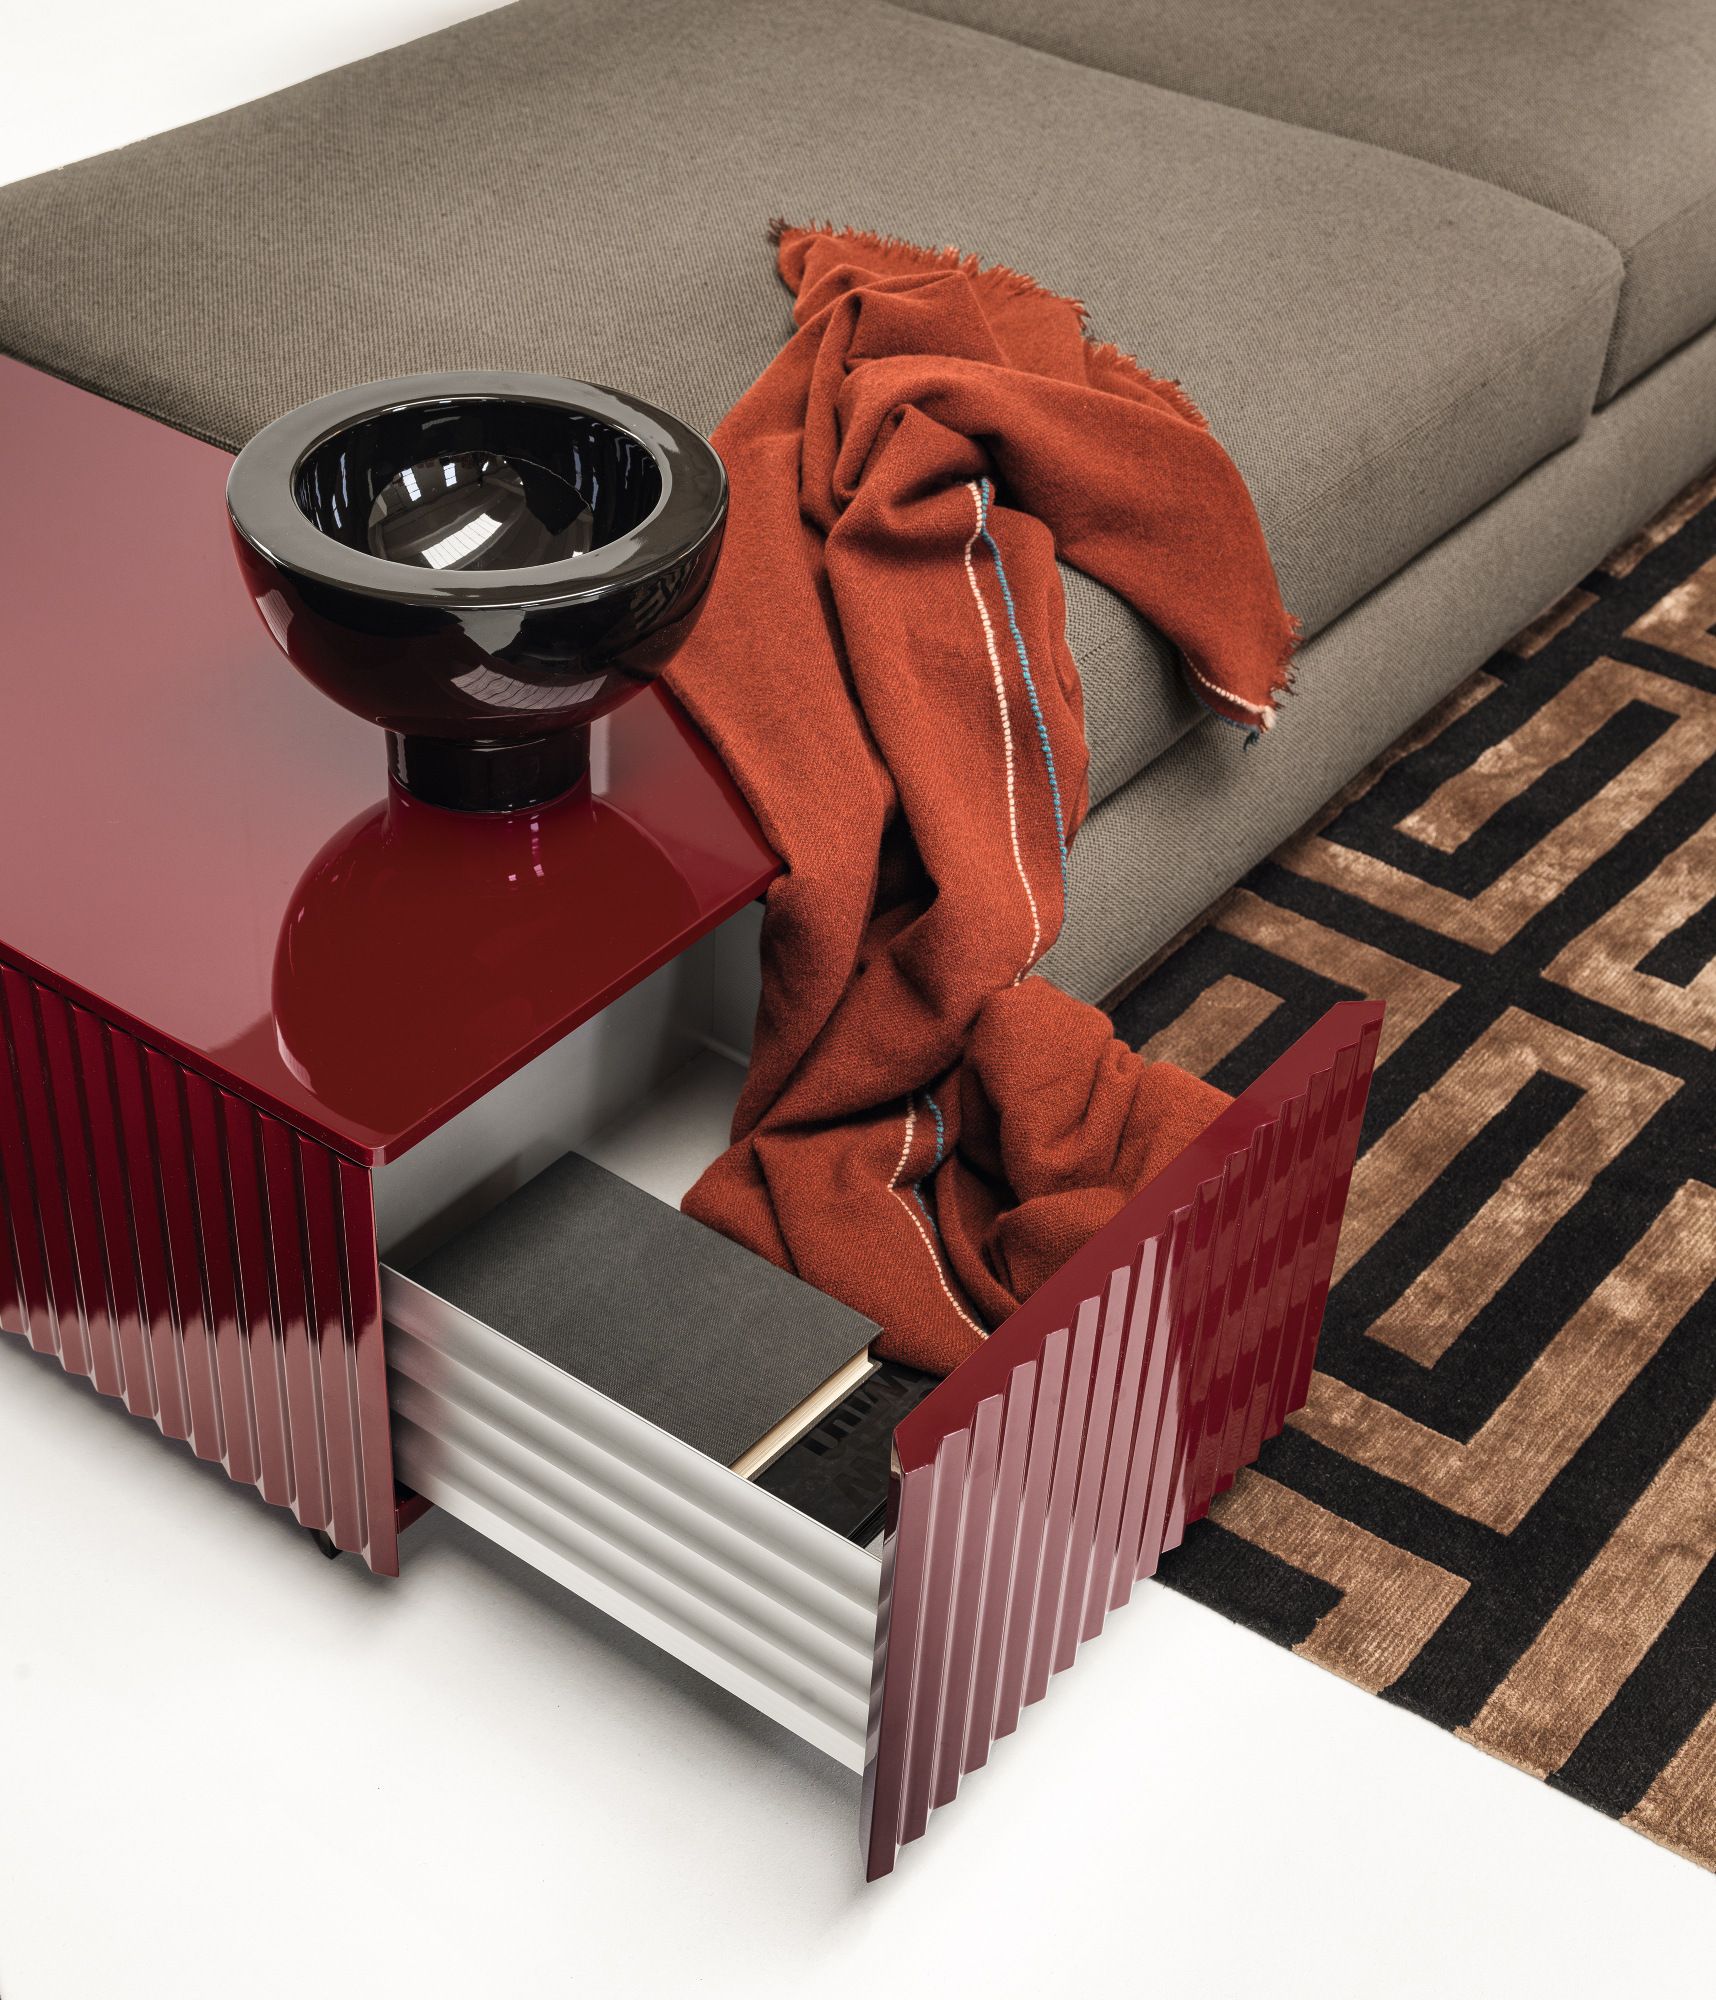 LEON by Casamania & Horm Coffee table